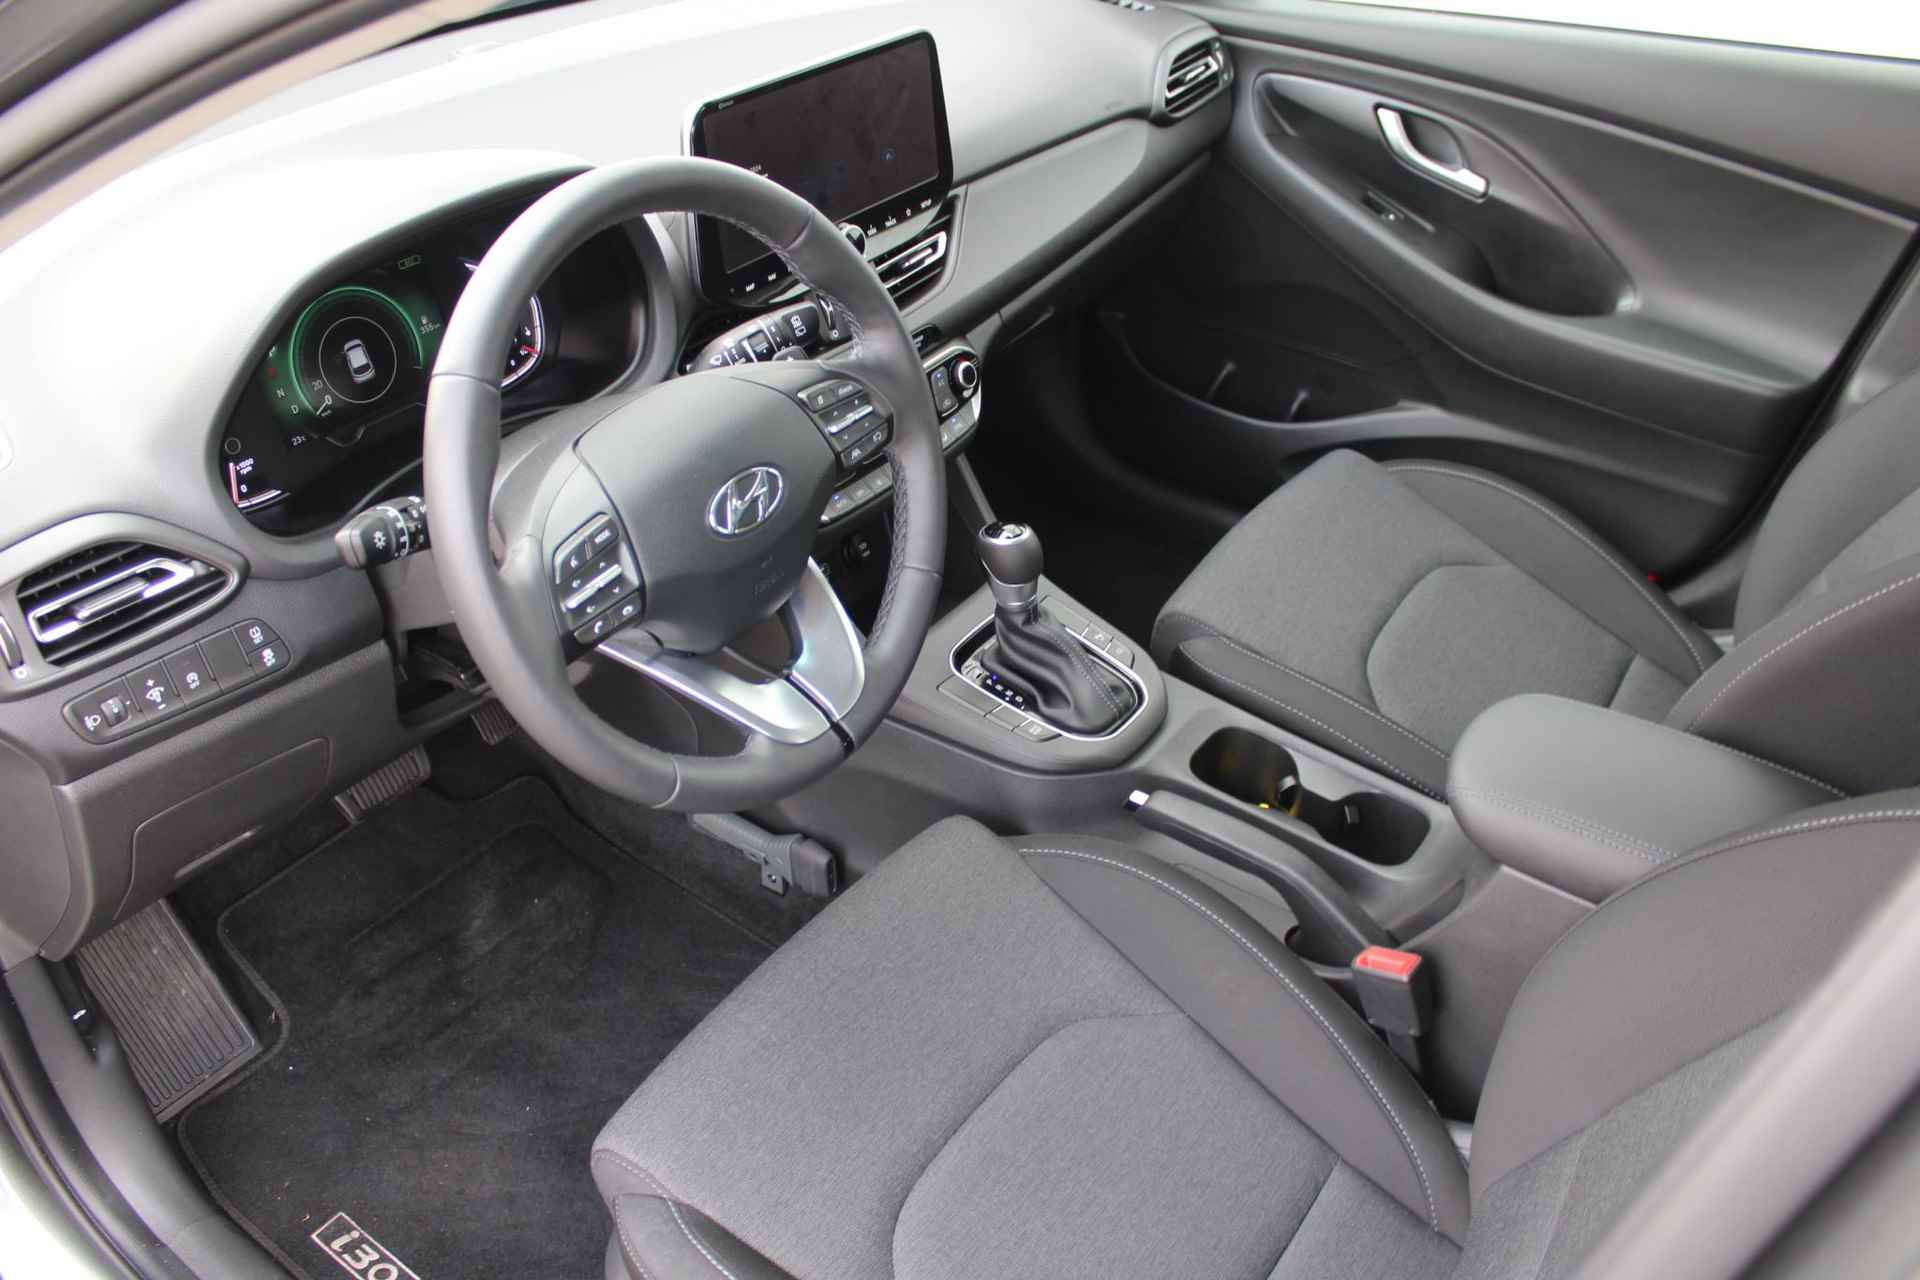 Hyundai i30 Wagon 1.0 T-GDi MHEV Comfort Smart AUTOMAAT / Navigatie + Apple Carplay/Android Auto / Cruise Control / Achteruitrijcamera / Climate Control / Keyless Entry & Start / - 19/43